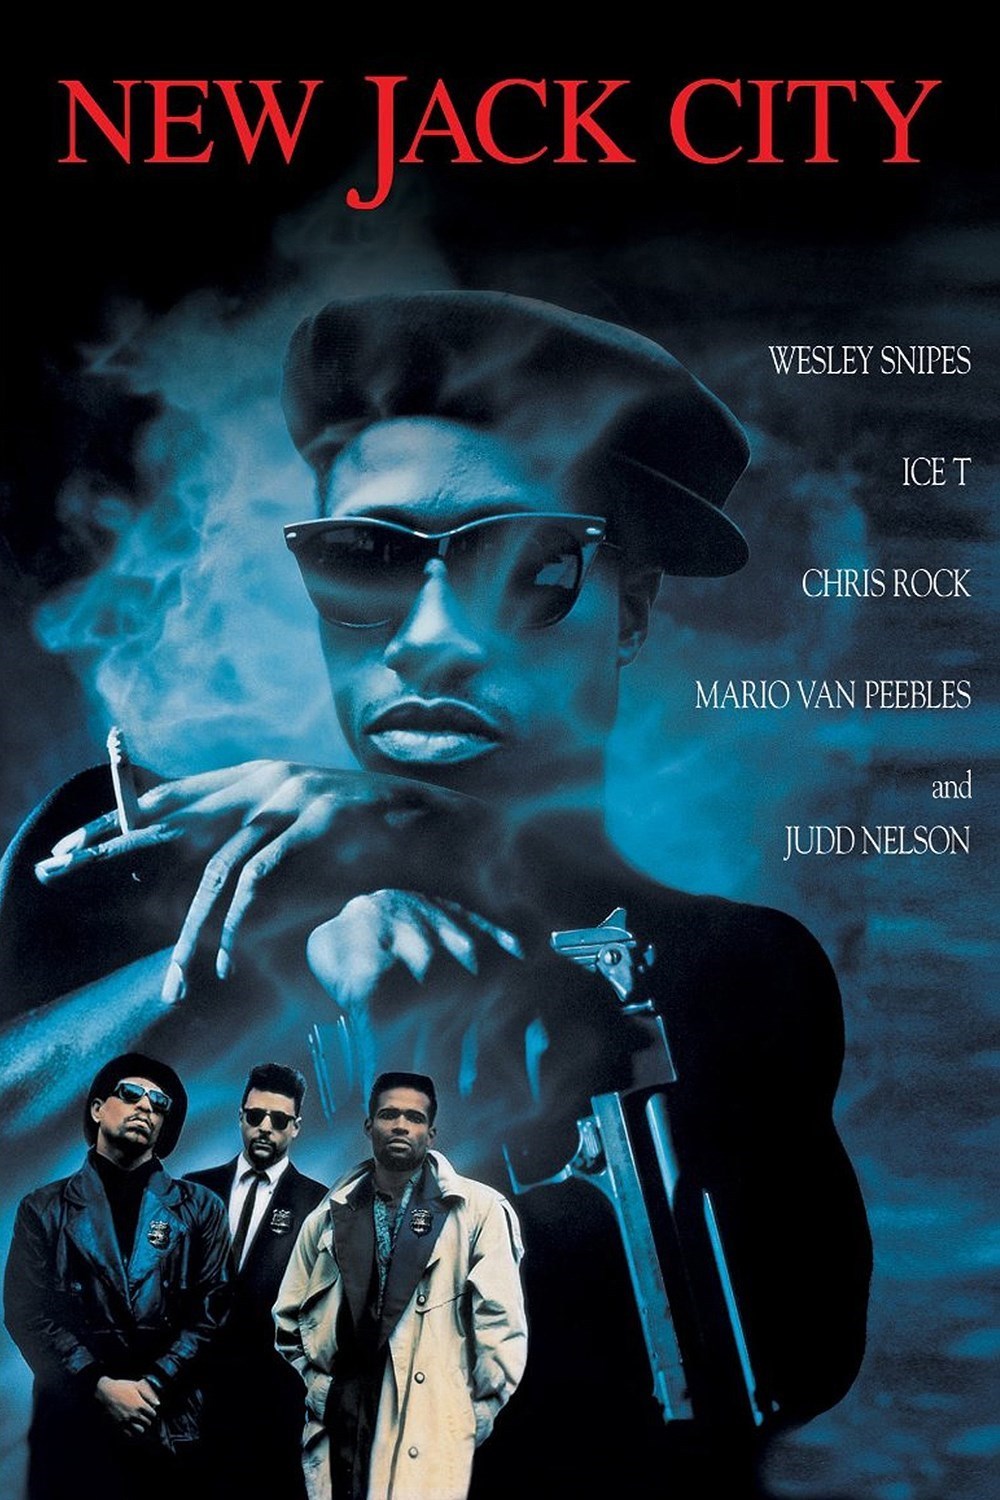 Today In Hip Hop History: Cult Classic Film ‘New Jack City’ Premiered in Theaters 33 Years Ago